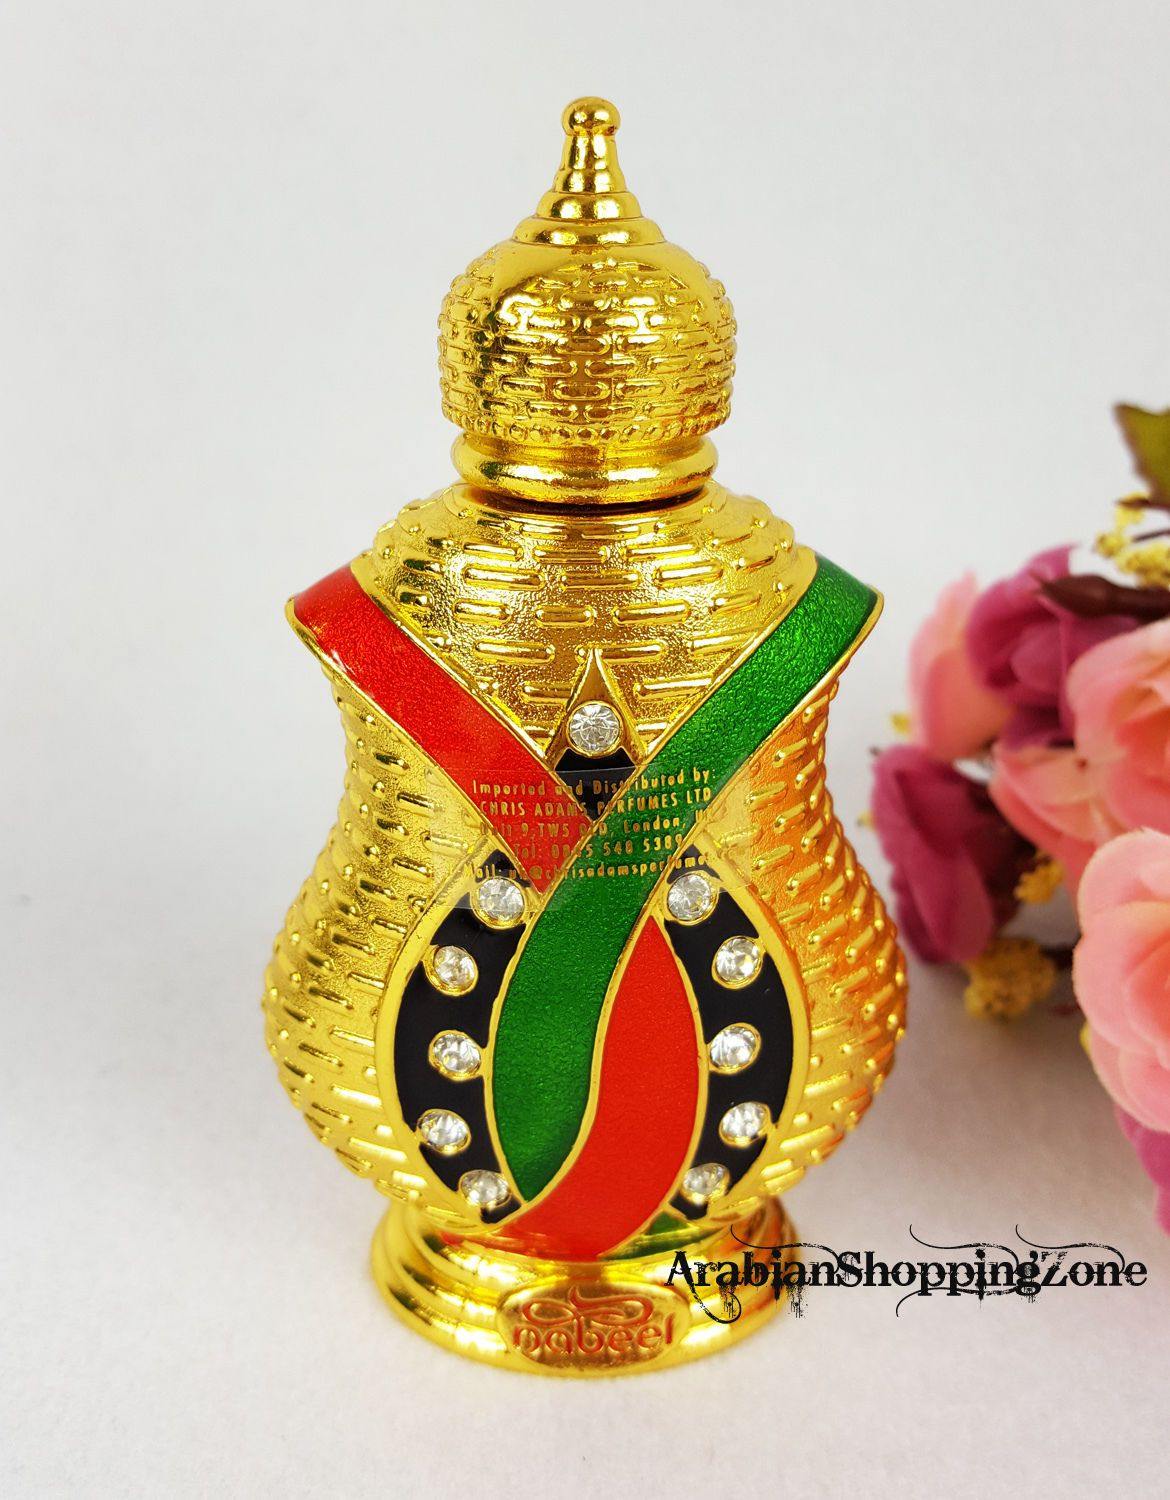 RAYEQ by Nabeel 20ml Concentrated Oil Perfume Free from Alcohol - Arabian Shopping Zone